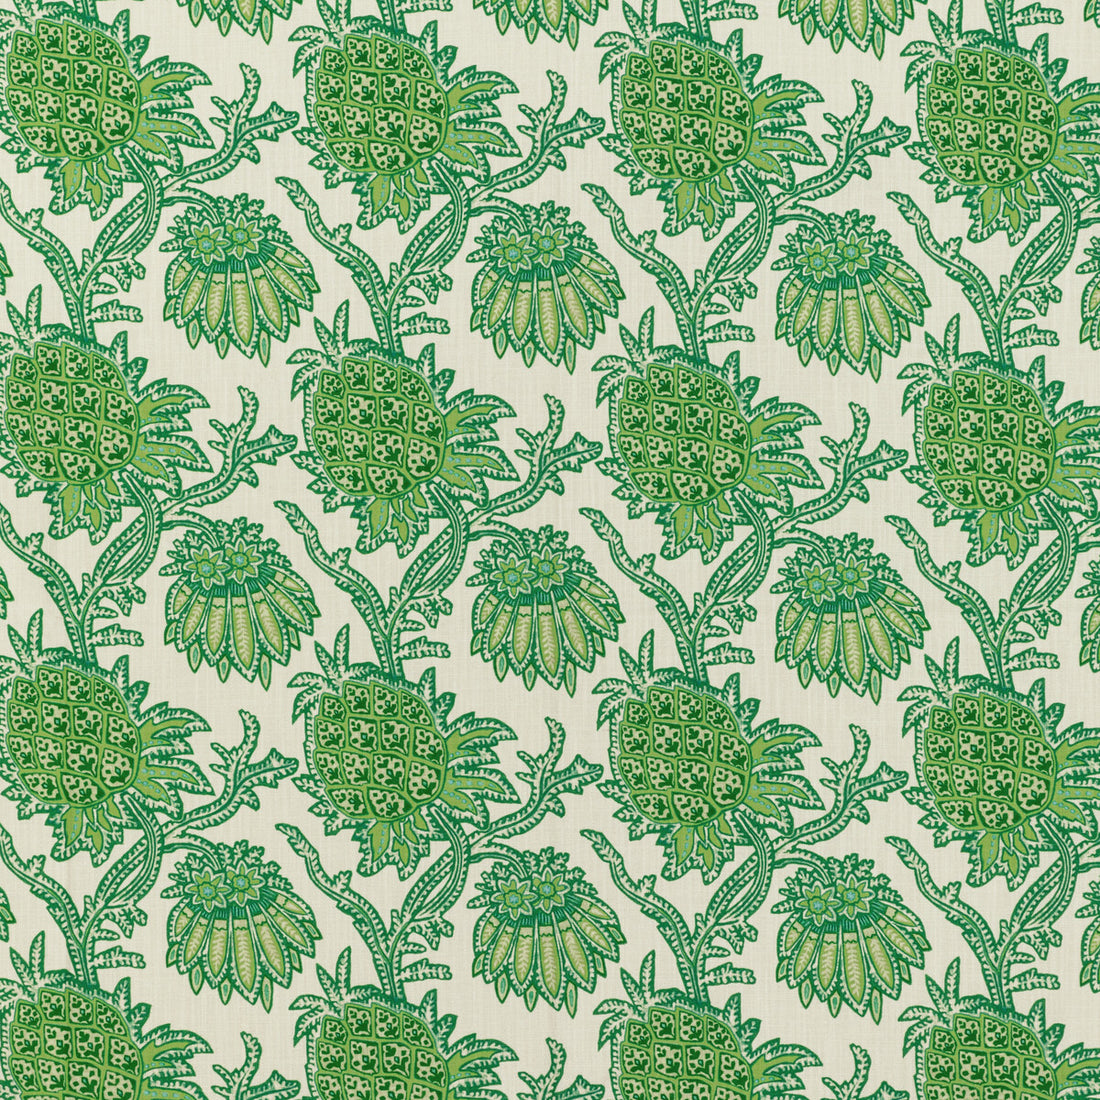 Brassac Print fabric in green color - pattern 8020129.3.0 - by Brunschwig &amp; Fils in the En Vacances II collection